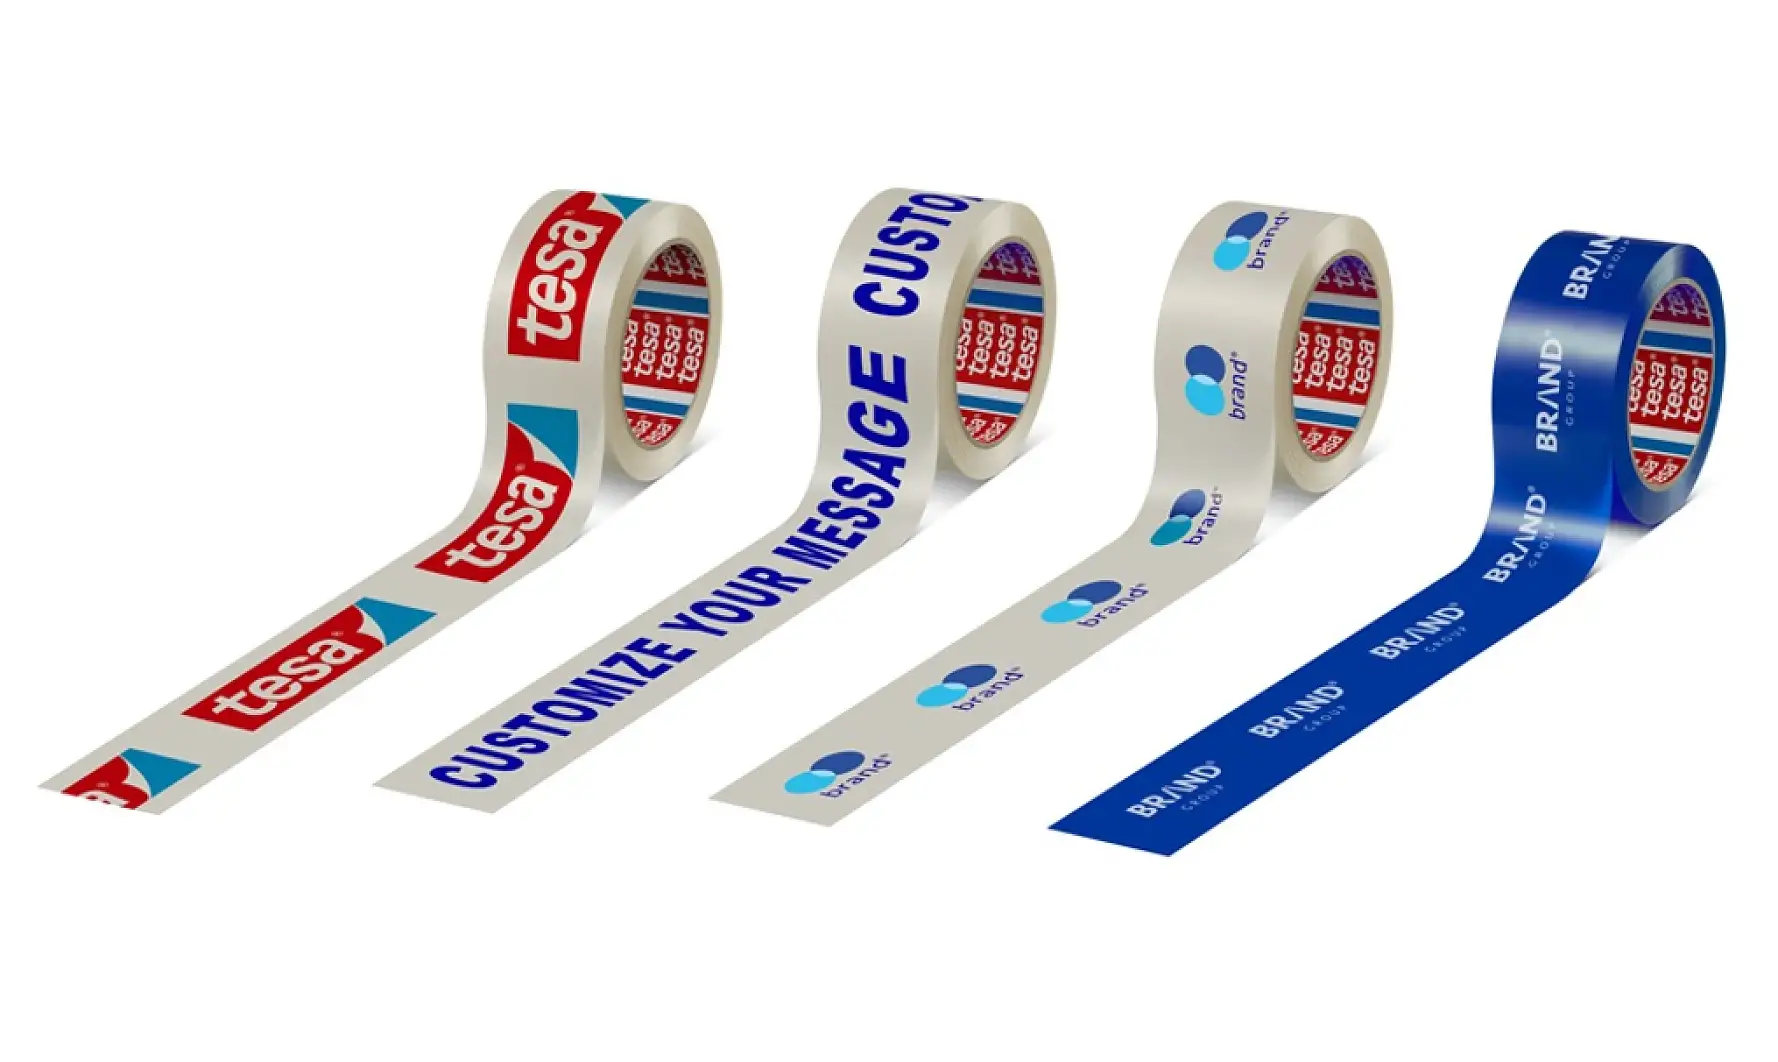 tesa 60028 and 60032 Printed Packaging Tape Design Examples